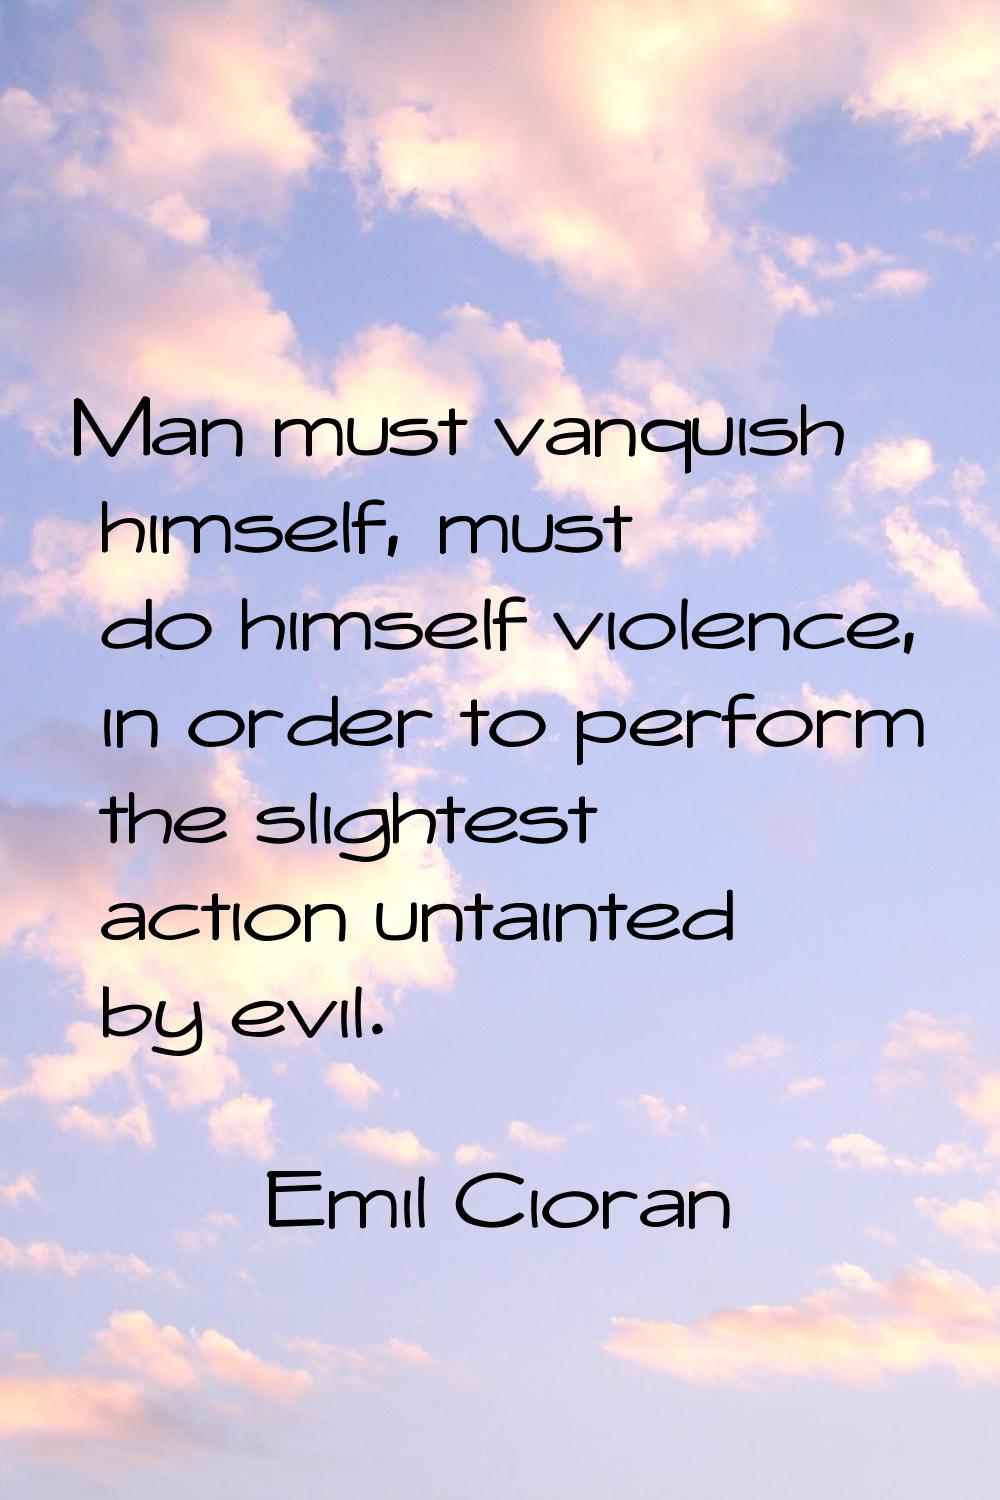 Man must vanquish himself, must do himself violence, in order to perform the slightest action untai